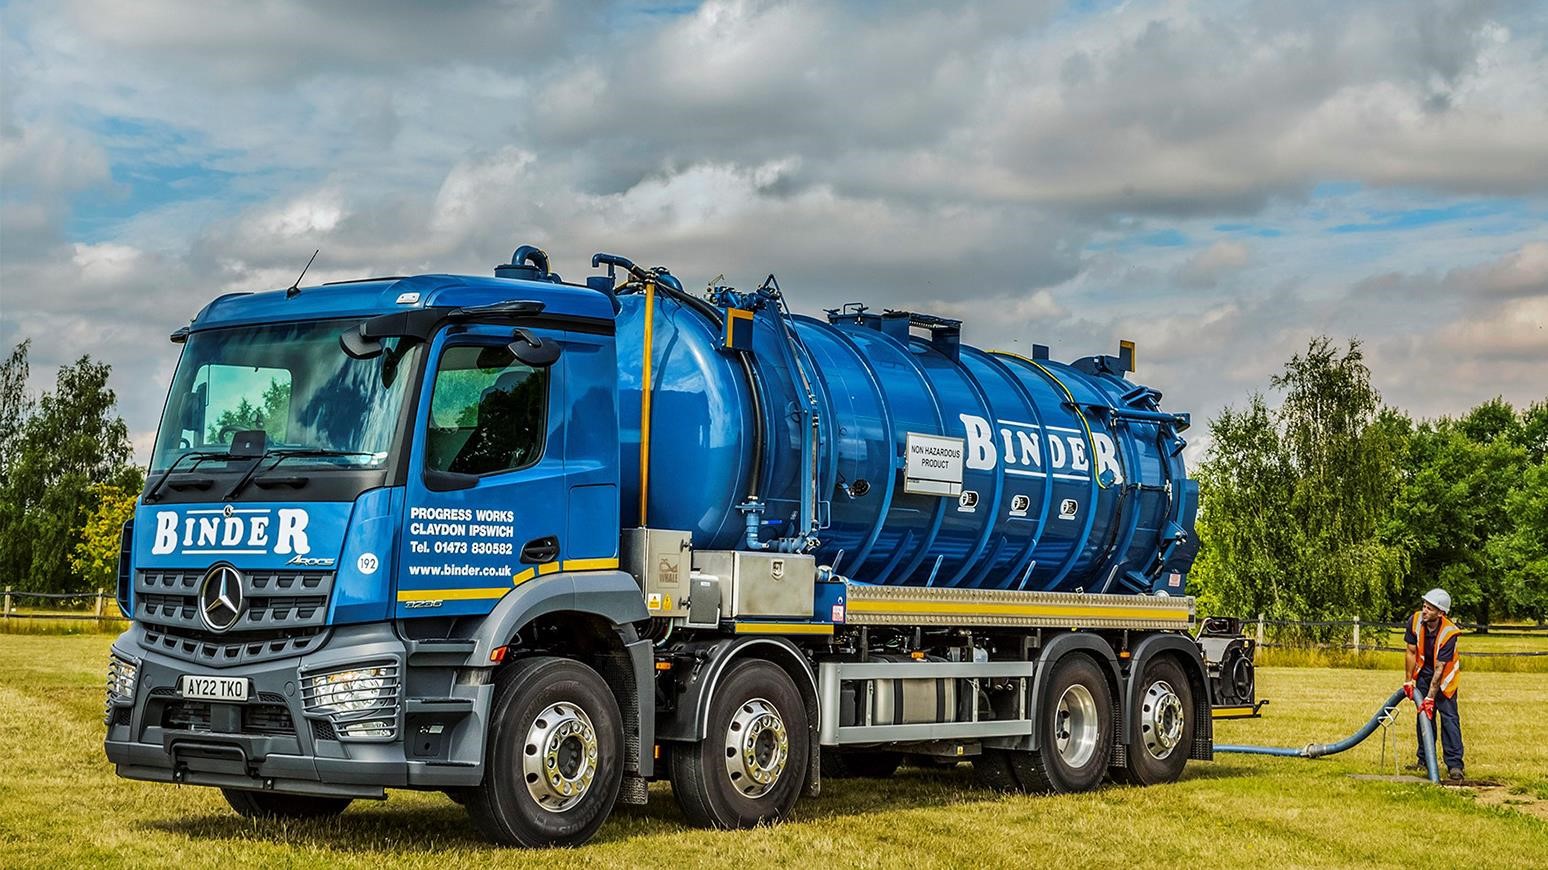 Wastewater Specialist Binder Makes Return To Mercedes-Benz With Purchase Of New Arocs